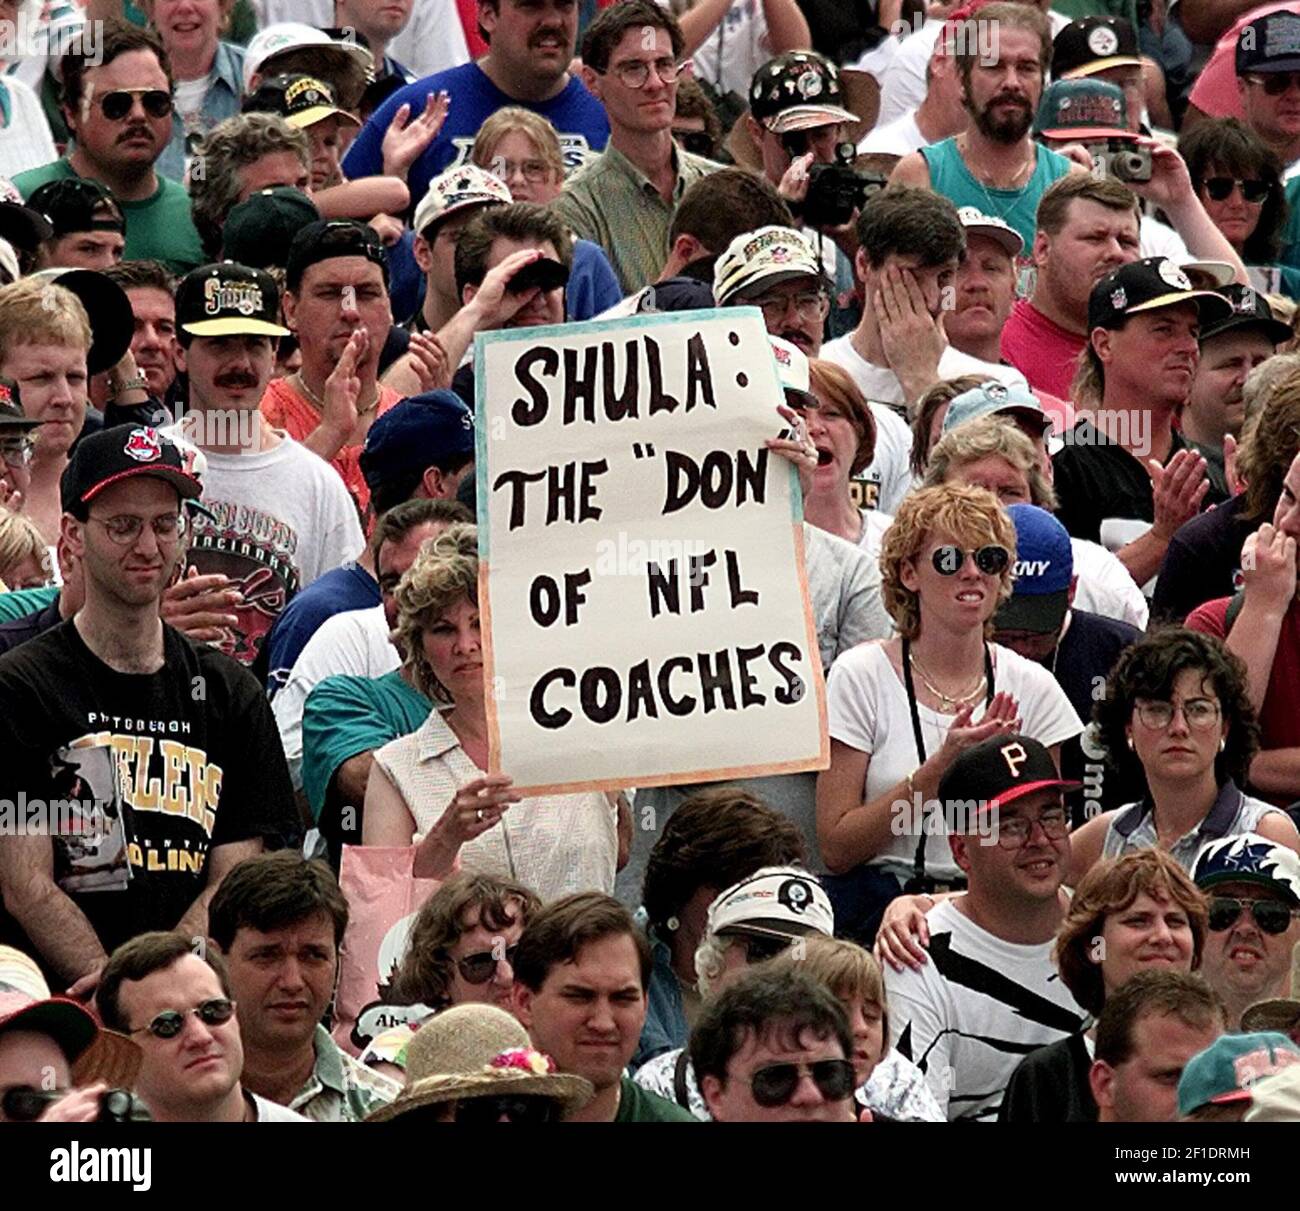 A fan with a Don Shula sign during Shula's induction ceremony into the NFL Football Hall of Fame in Canton, Ohio. (Photo by Joe Rimkus Jr./Miami Herald/TNS/Sipa USA) Stock Photo